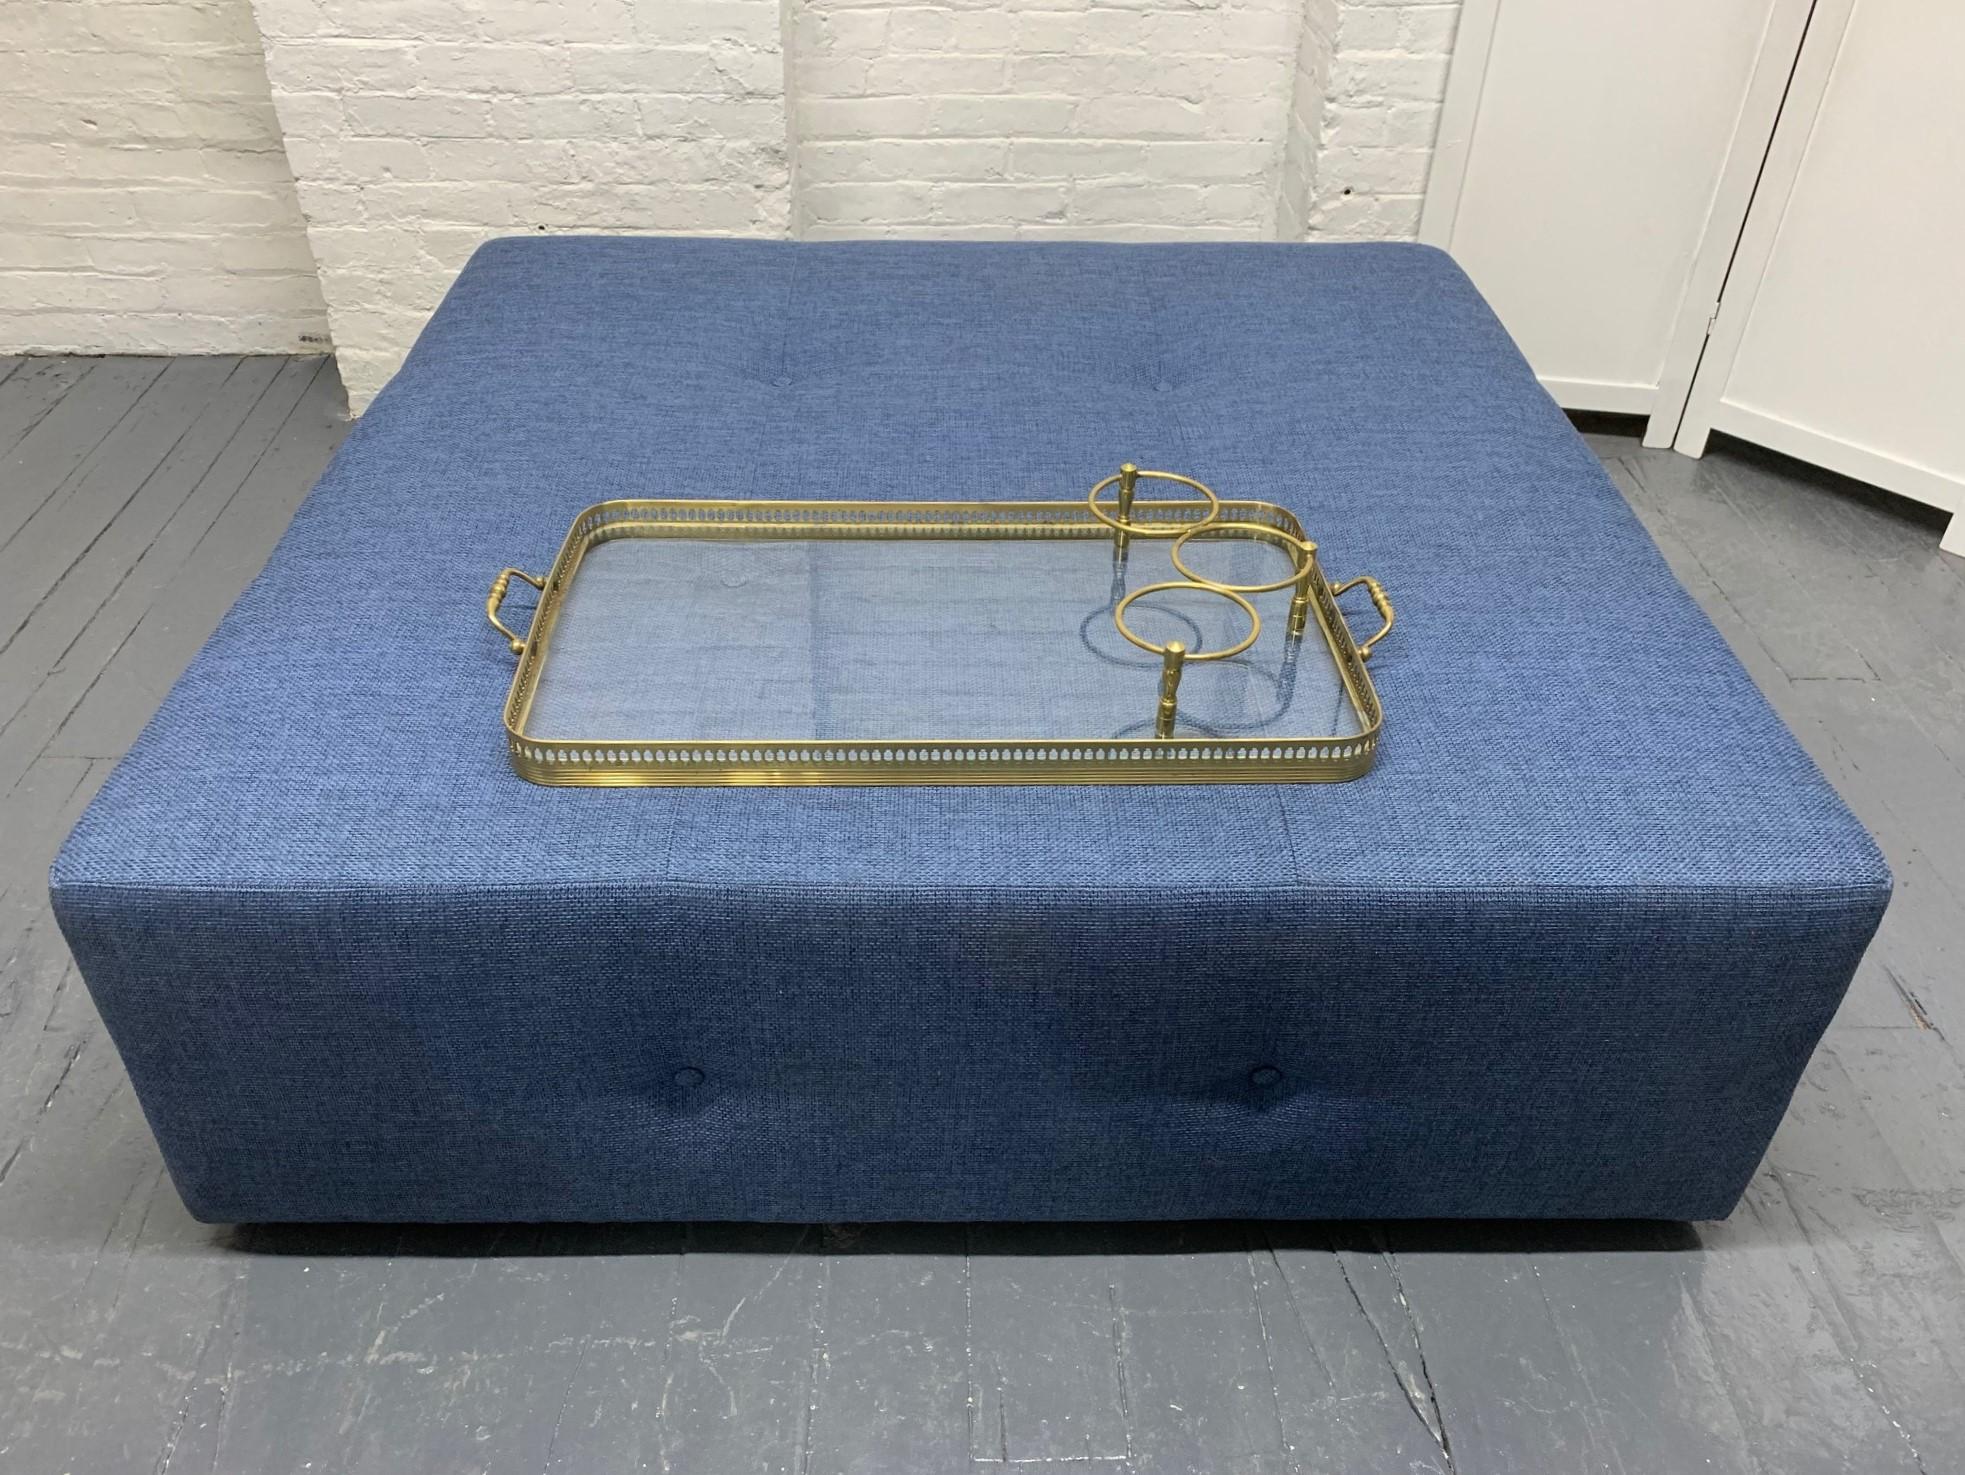 Our custom designed large-scale tufted ottoman with a brass and glass serving tray. The glass tray has a decorative brass trim and three brass compartments for bottles.